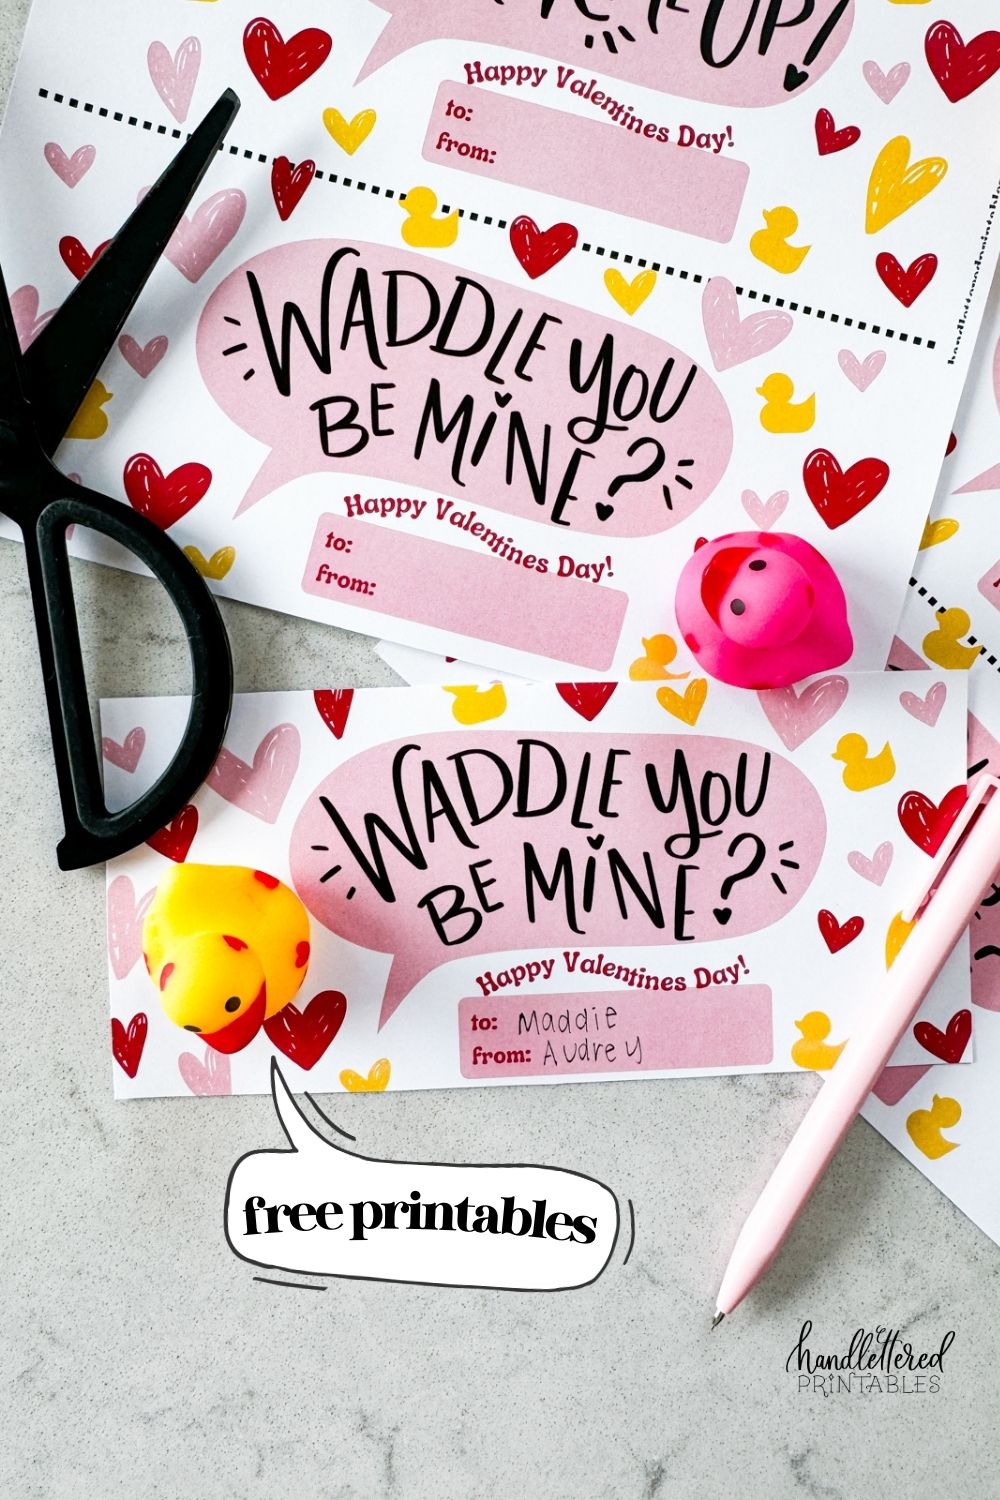 duck themed printable valentines day cards. card shown reads: waddle you be mine with a small happy valentines day. shown with rubber duckies